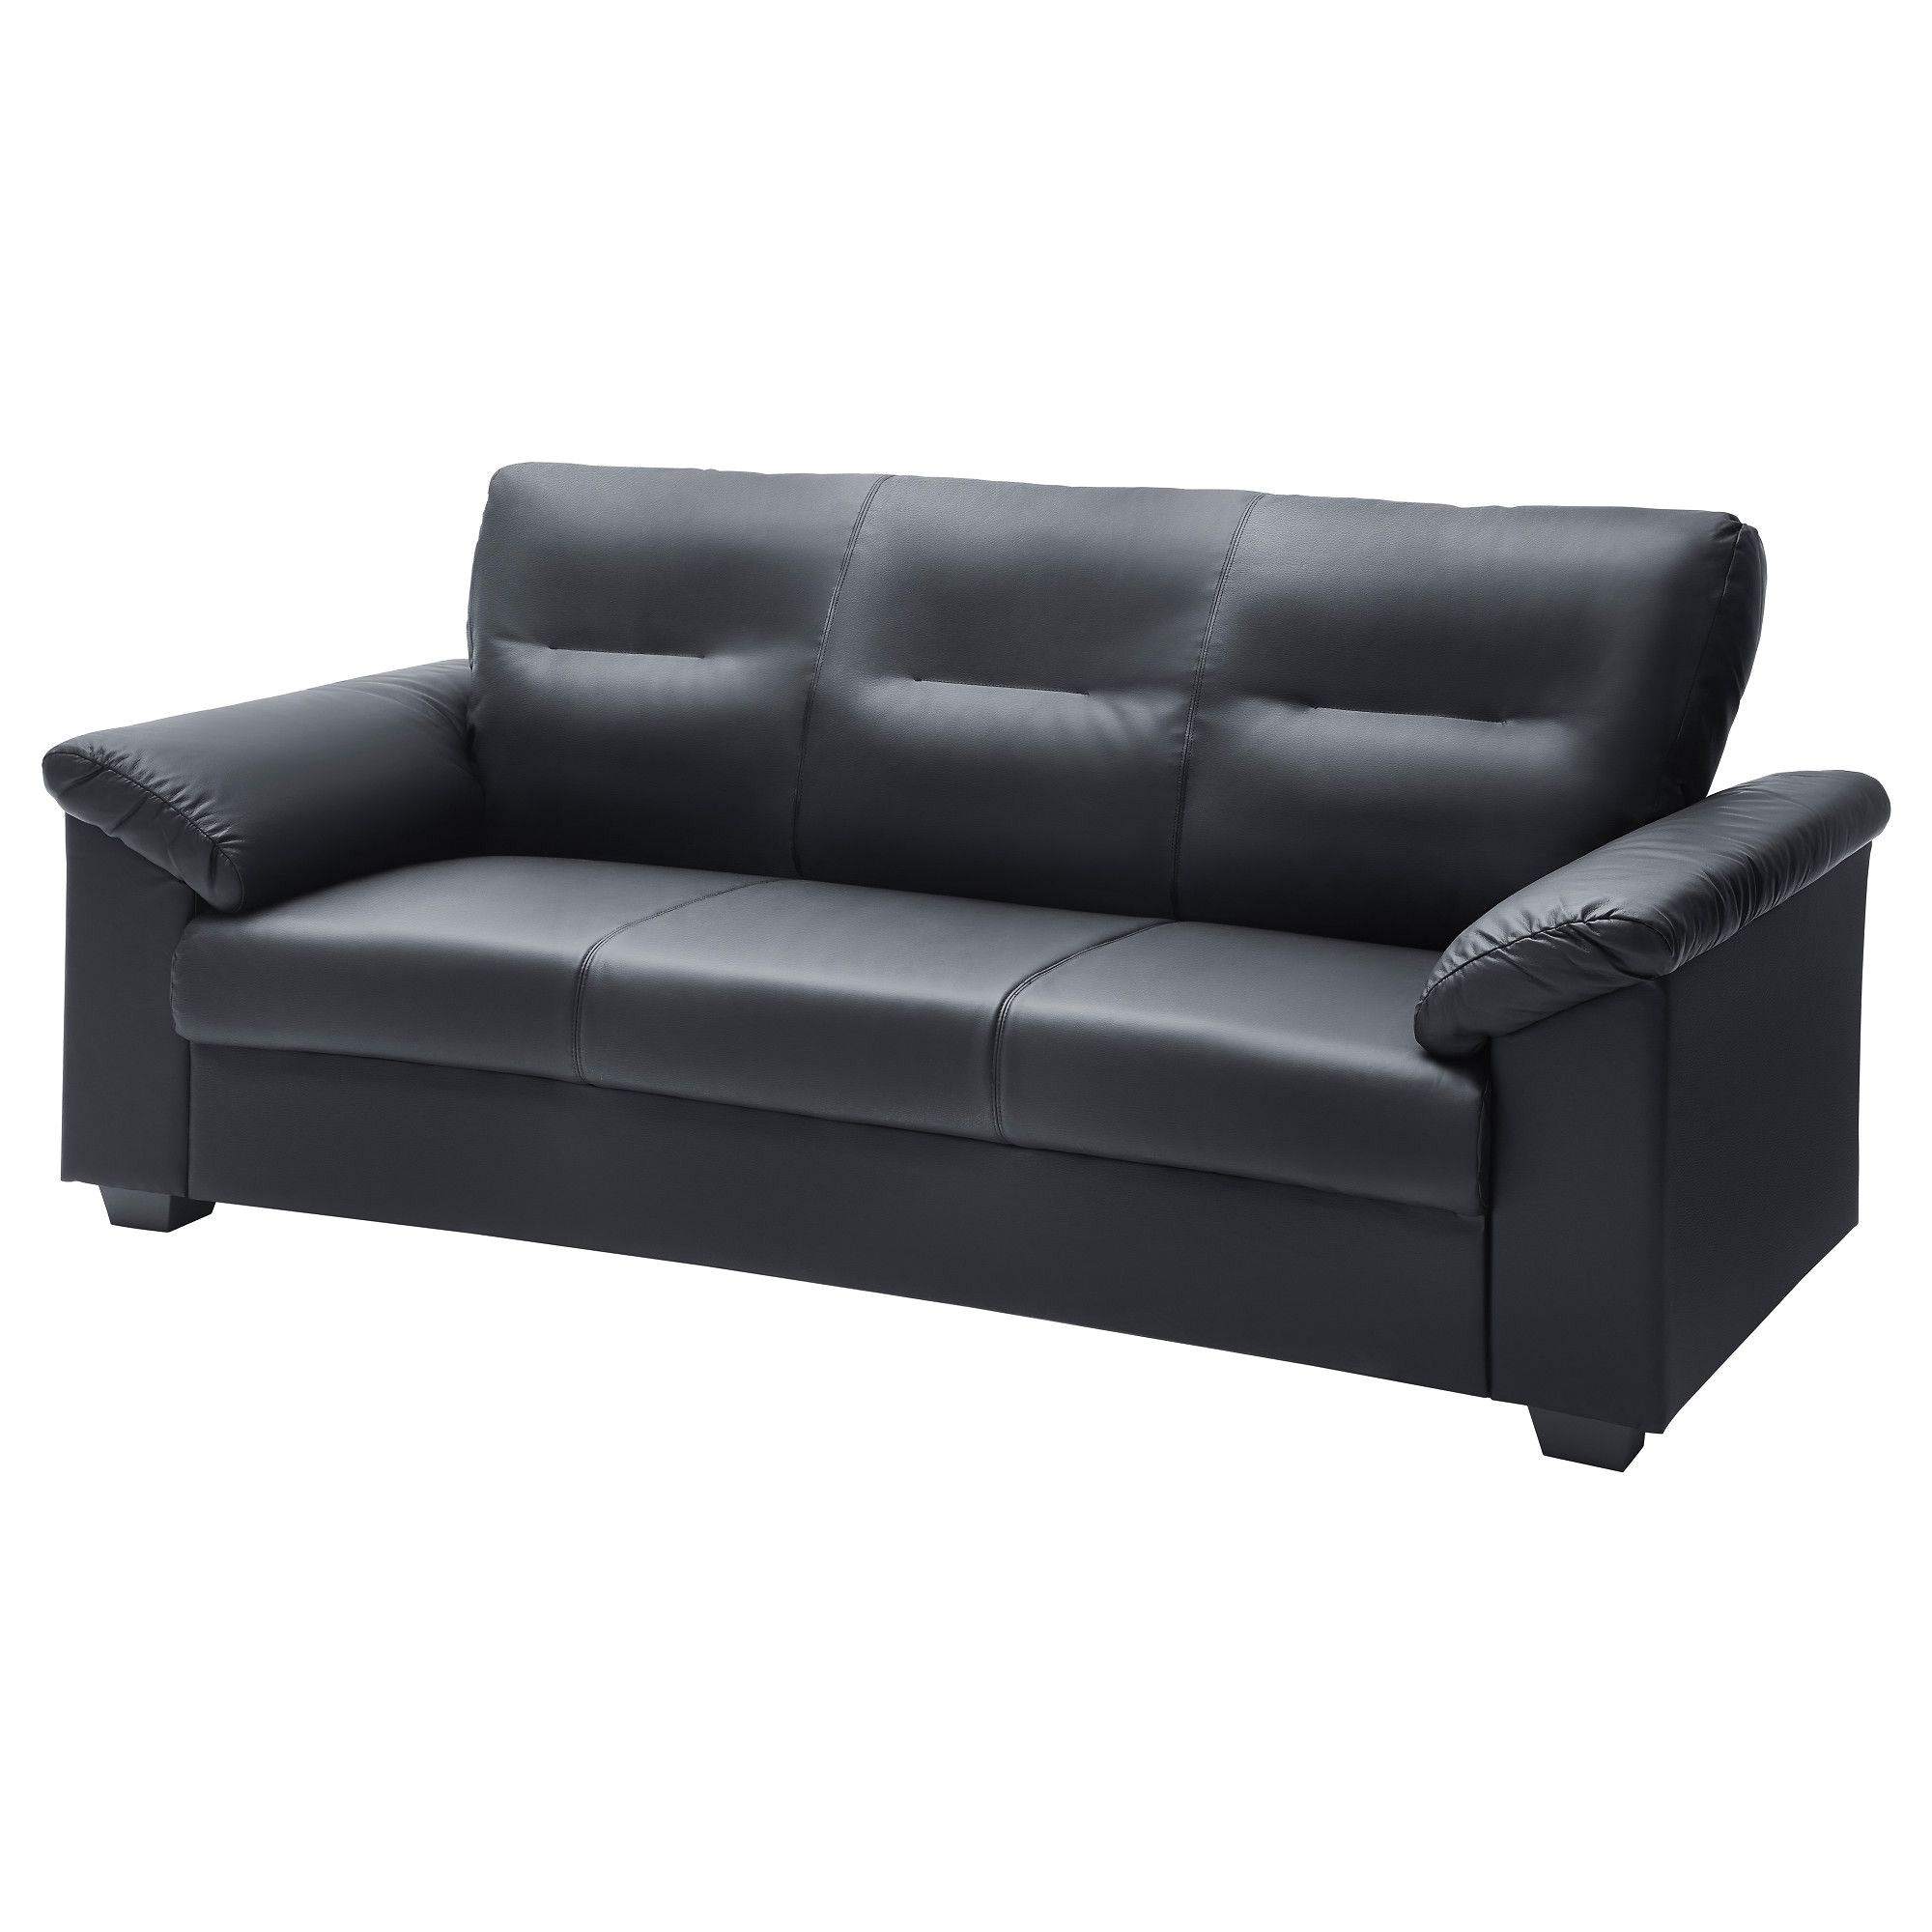 ikea knislinge sofa the high back provides good support for your neck high resilience foam and polyester in the seat cushion for great sitting